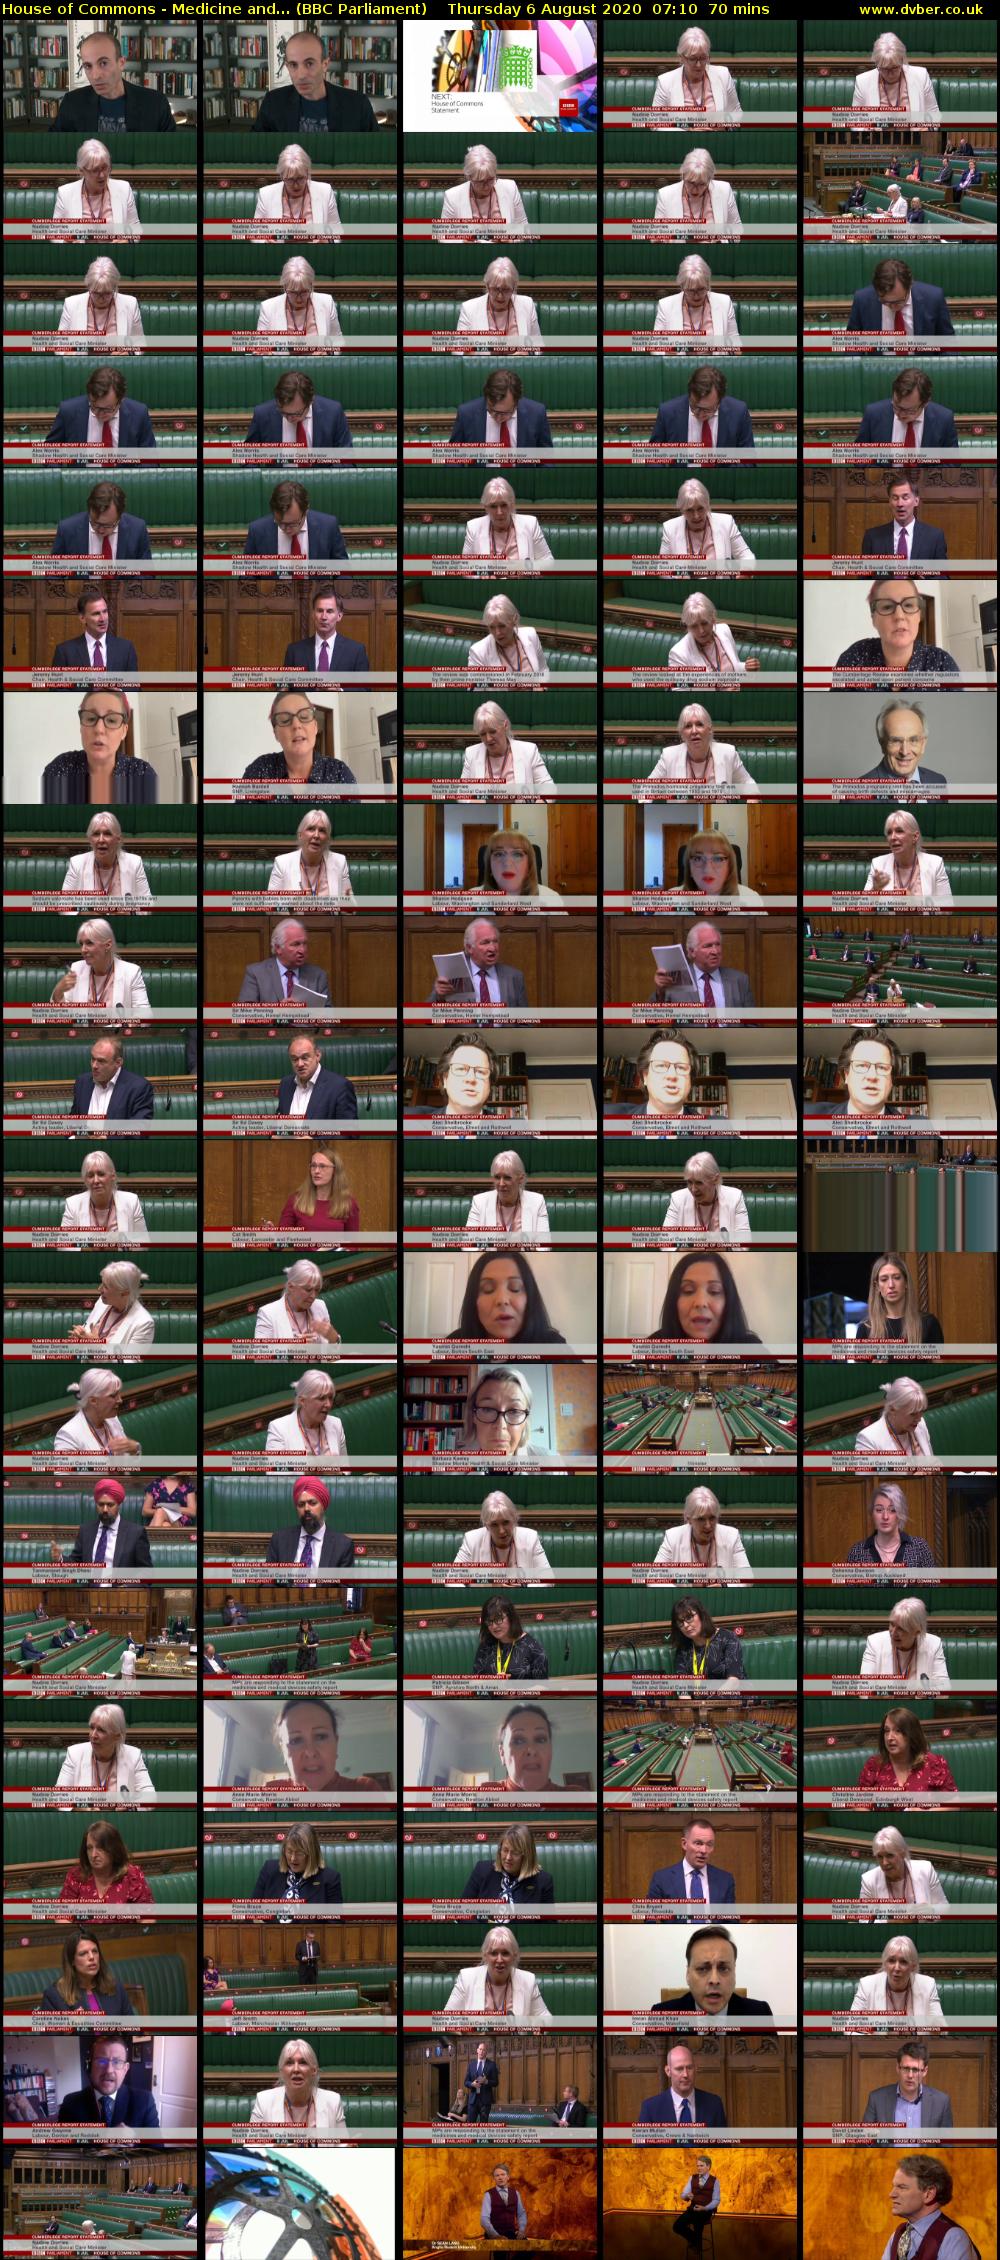 House of Commons - Medicine and... (BBC Parliament) Thursday 6 August 2020 07:10 - 08:20